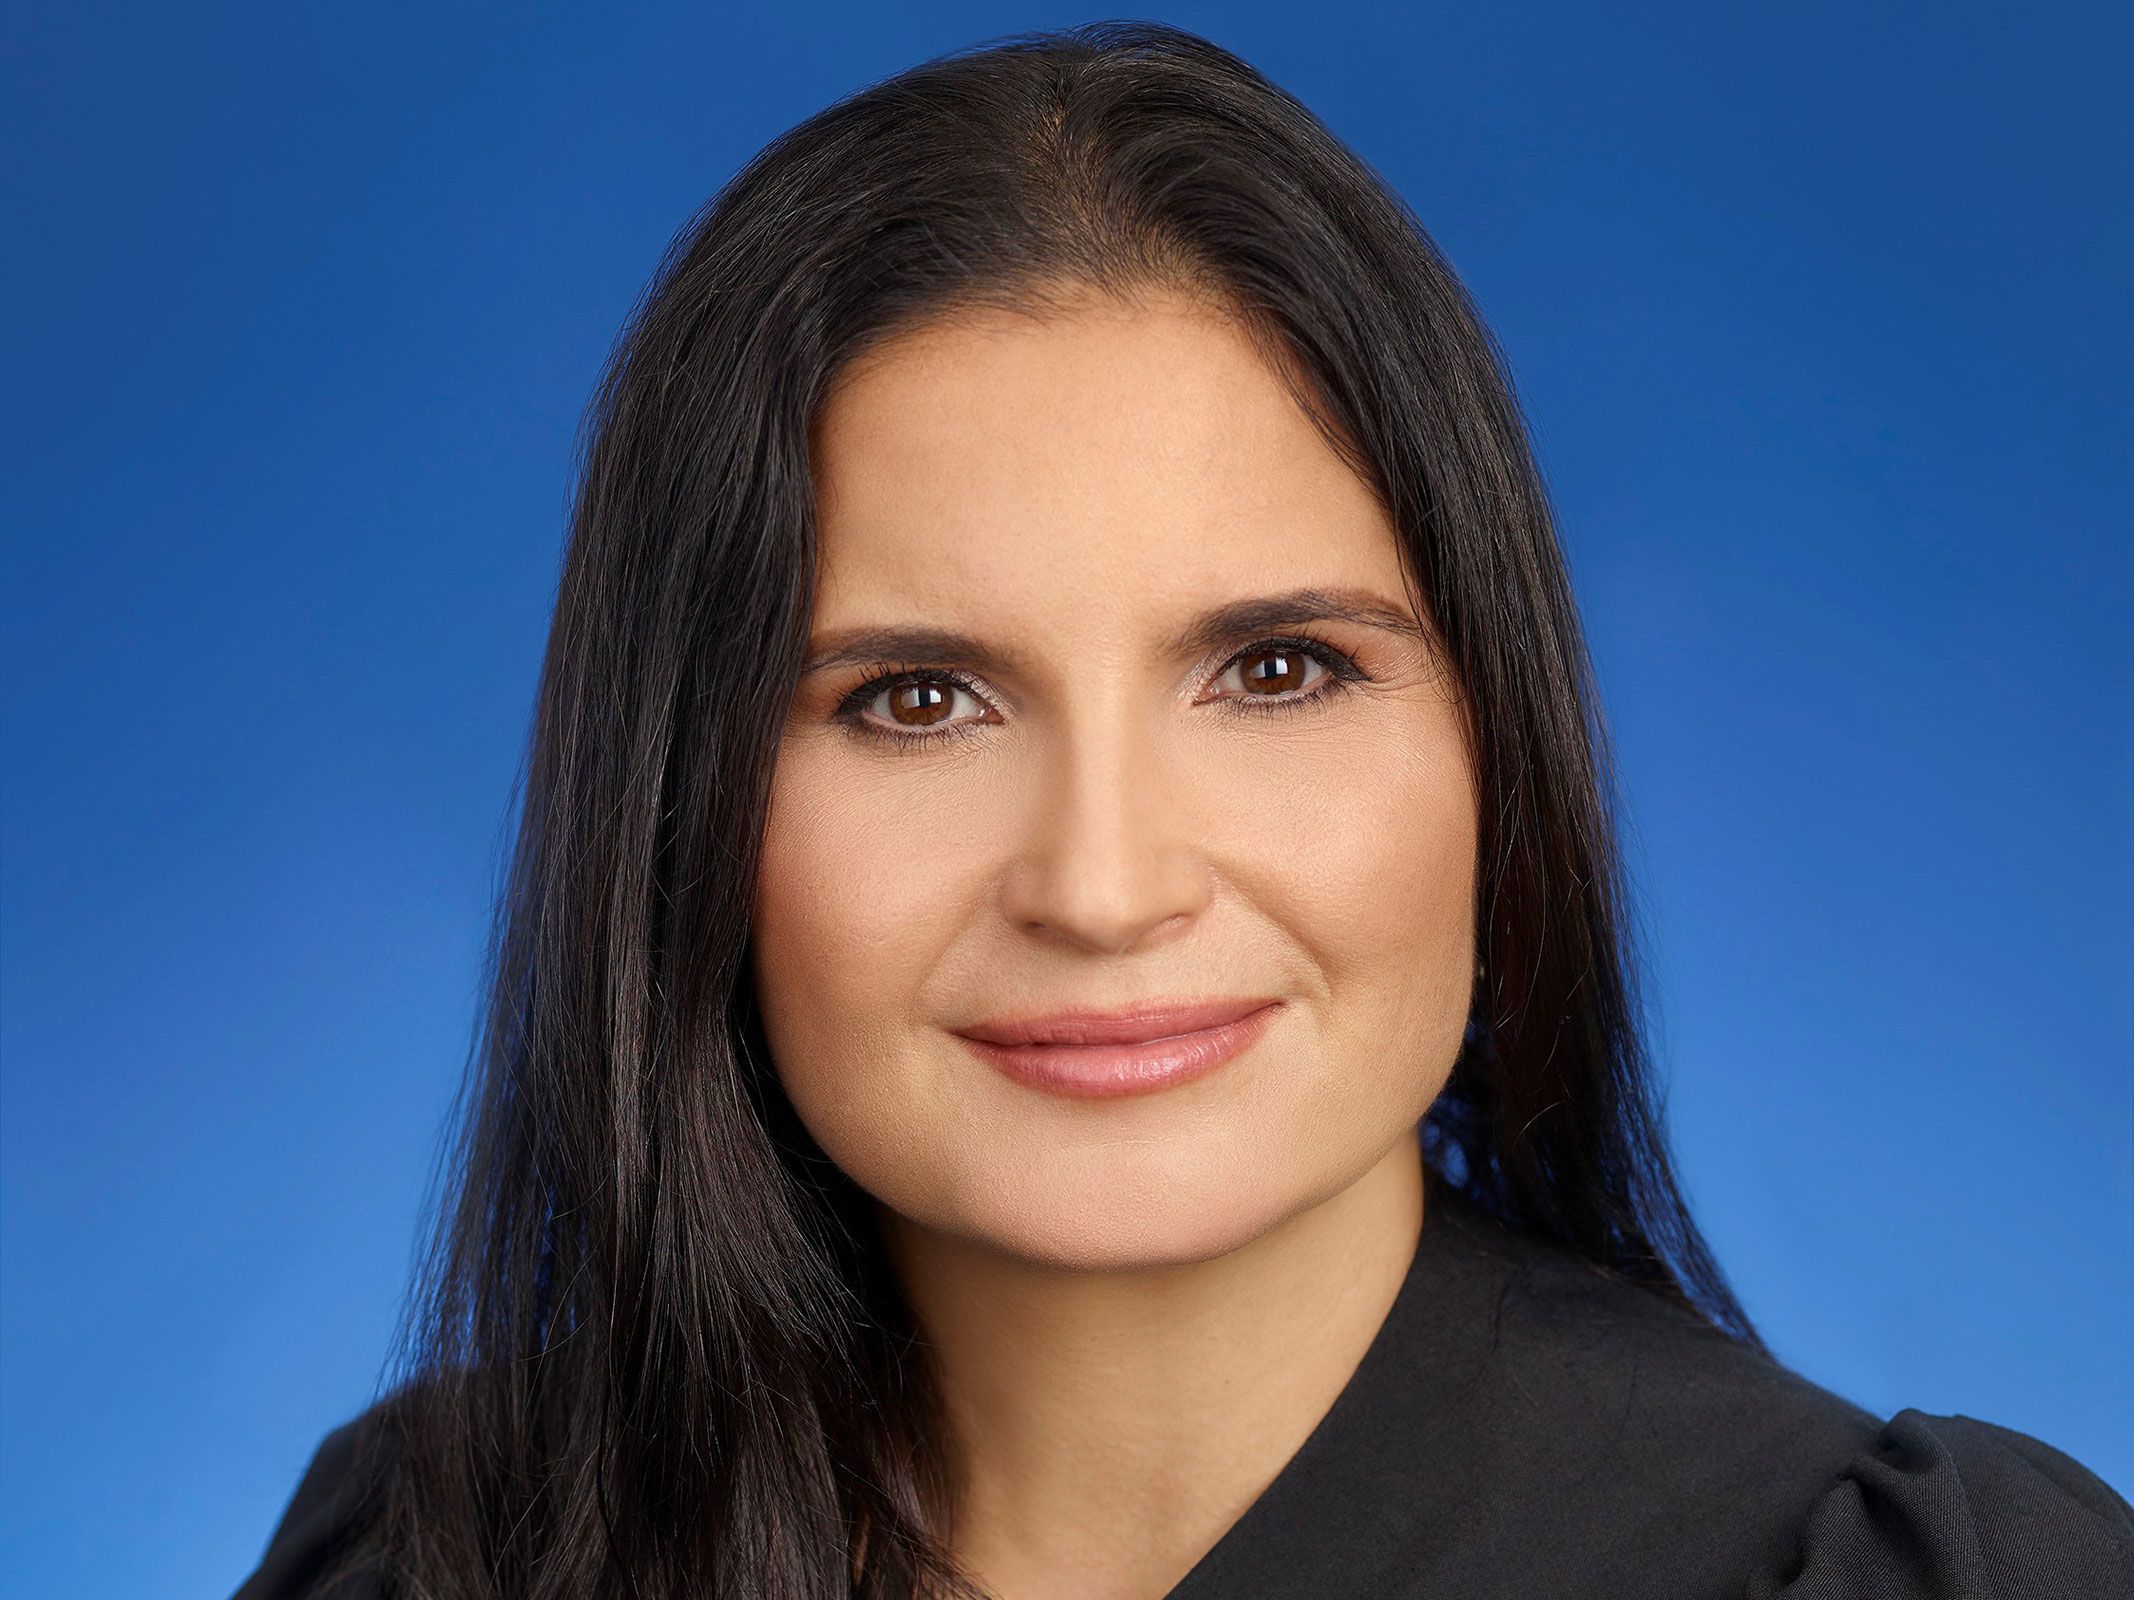 US District Judge Aileen M. Cannon.